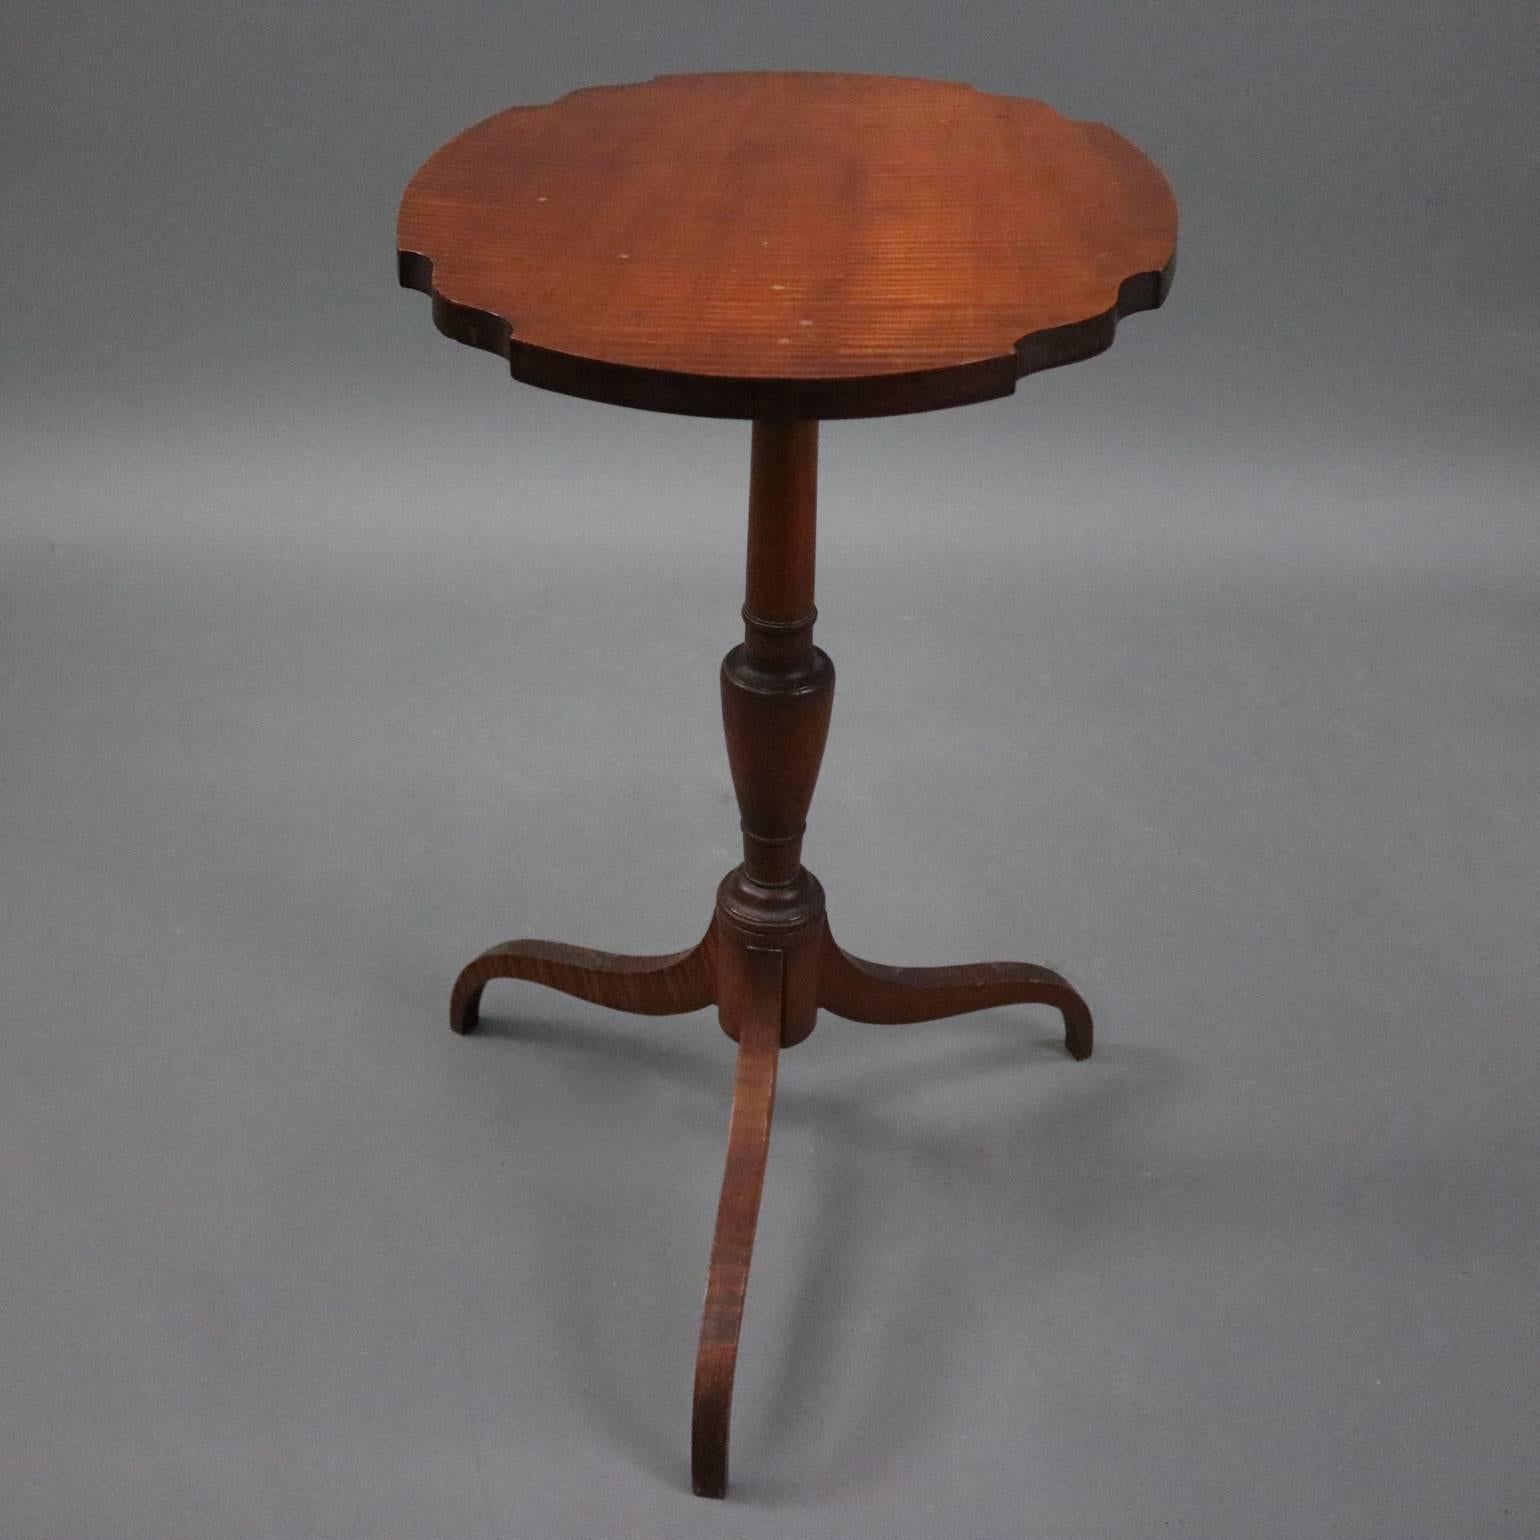 American Antique Federal Tiger Maple Oval Tilt-Top Lamp Stand, circa 1850